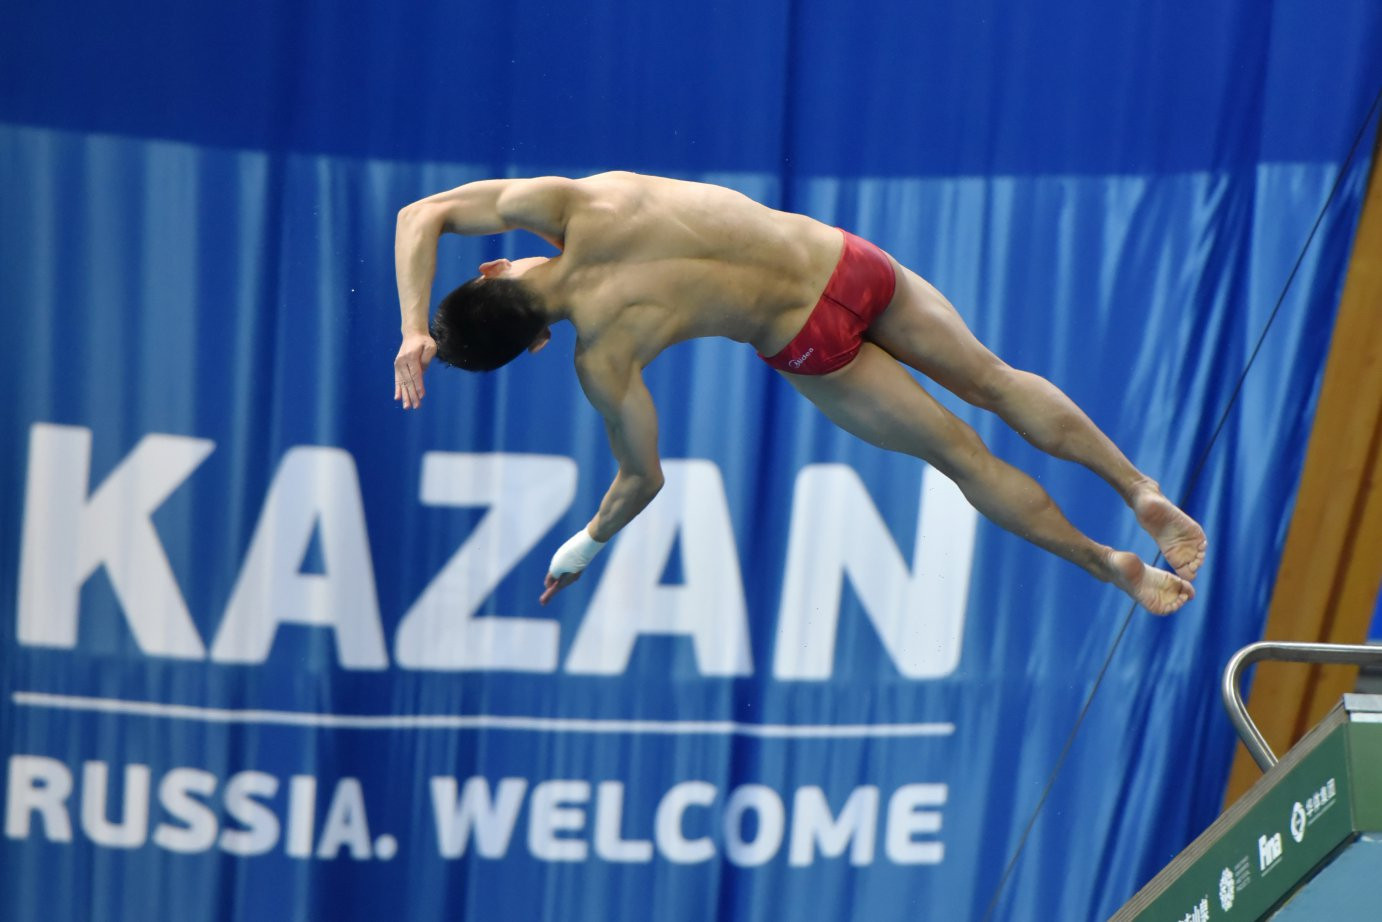 Double world champion Yang Hao of China secured gold in the men's 10 metres platform event ©FINA